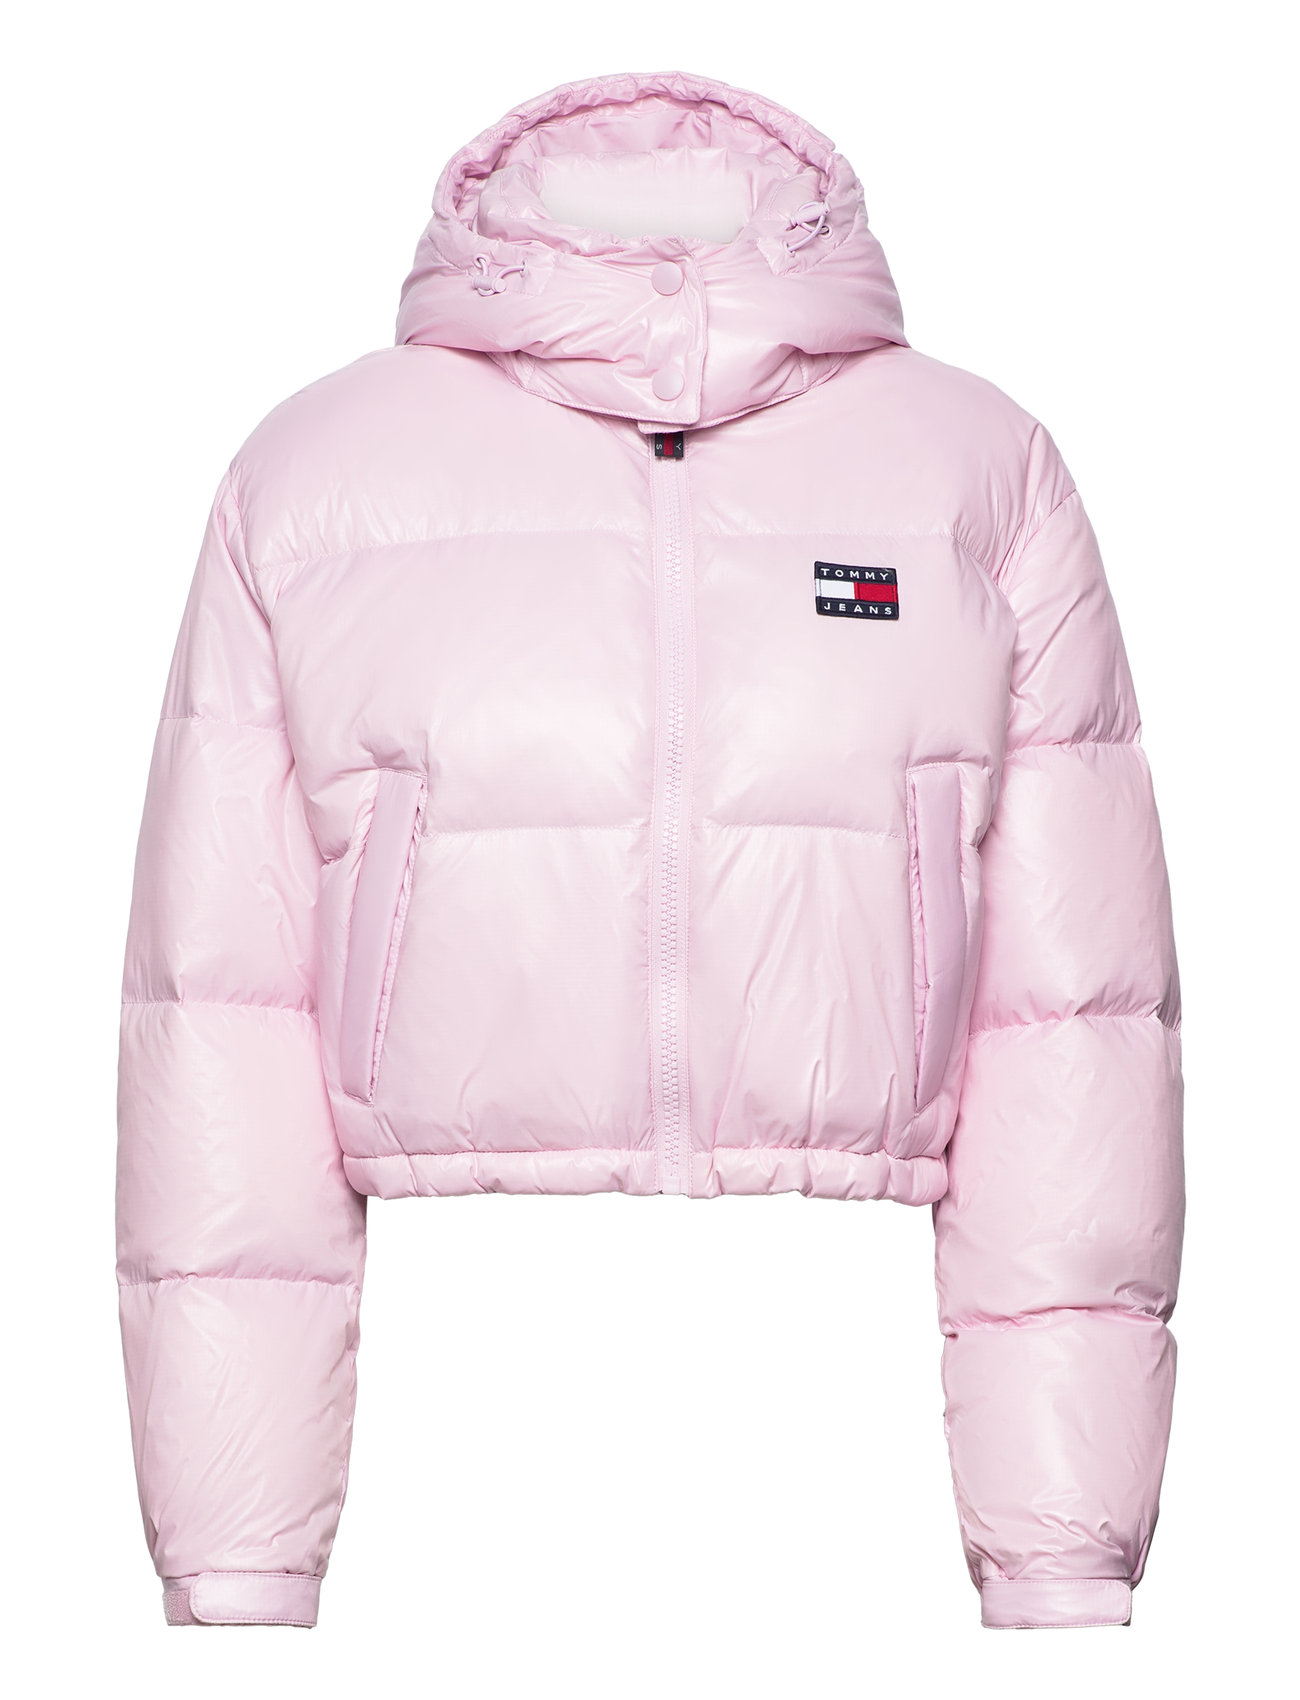 Tommy Jeans Tjw Crp Alaska Puffer - 126.45 €. Buy Down- & padded jackets  from Tommy Jeans online at Boozt.com. Fast delivery and easy returns